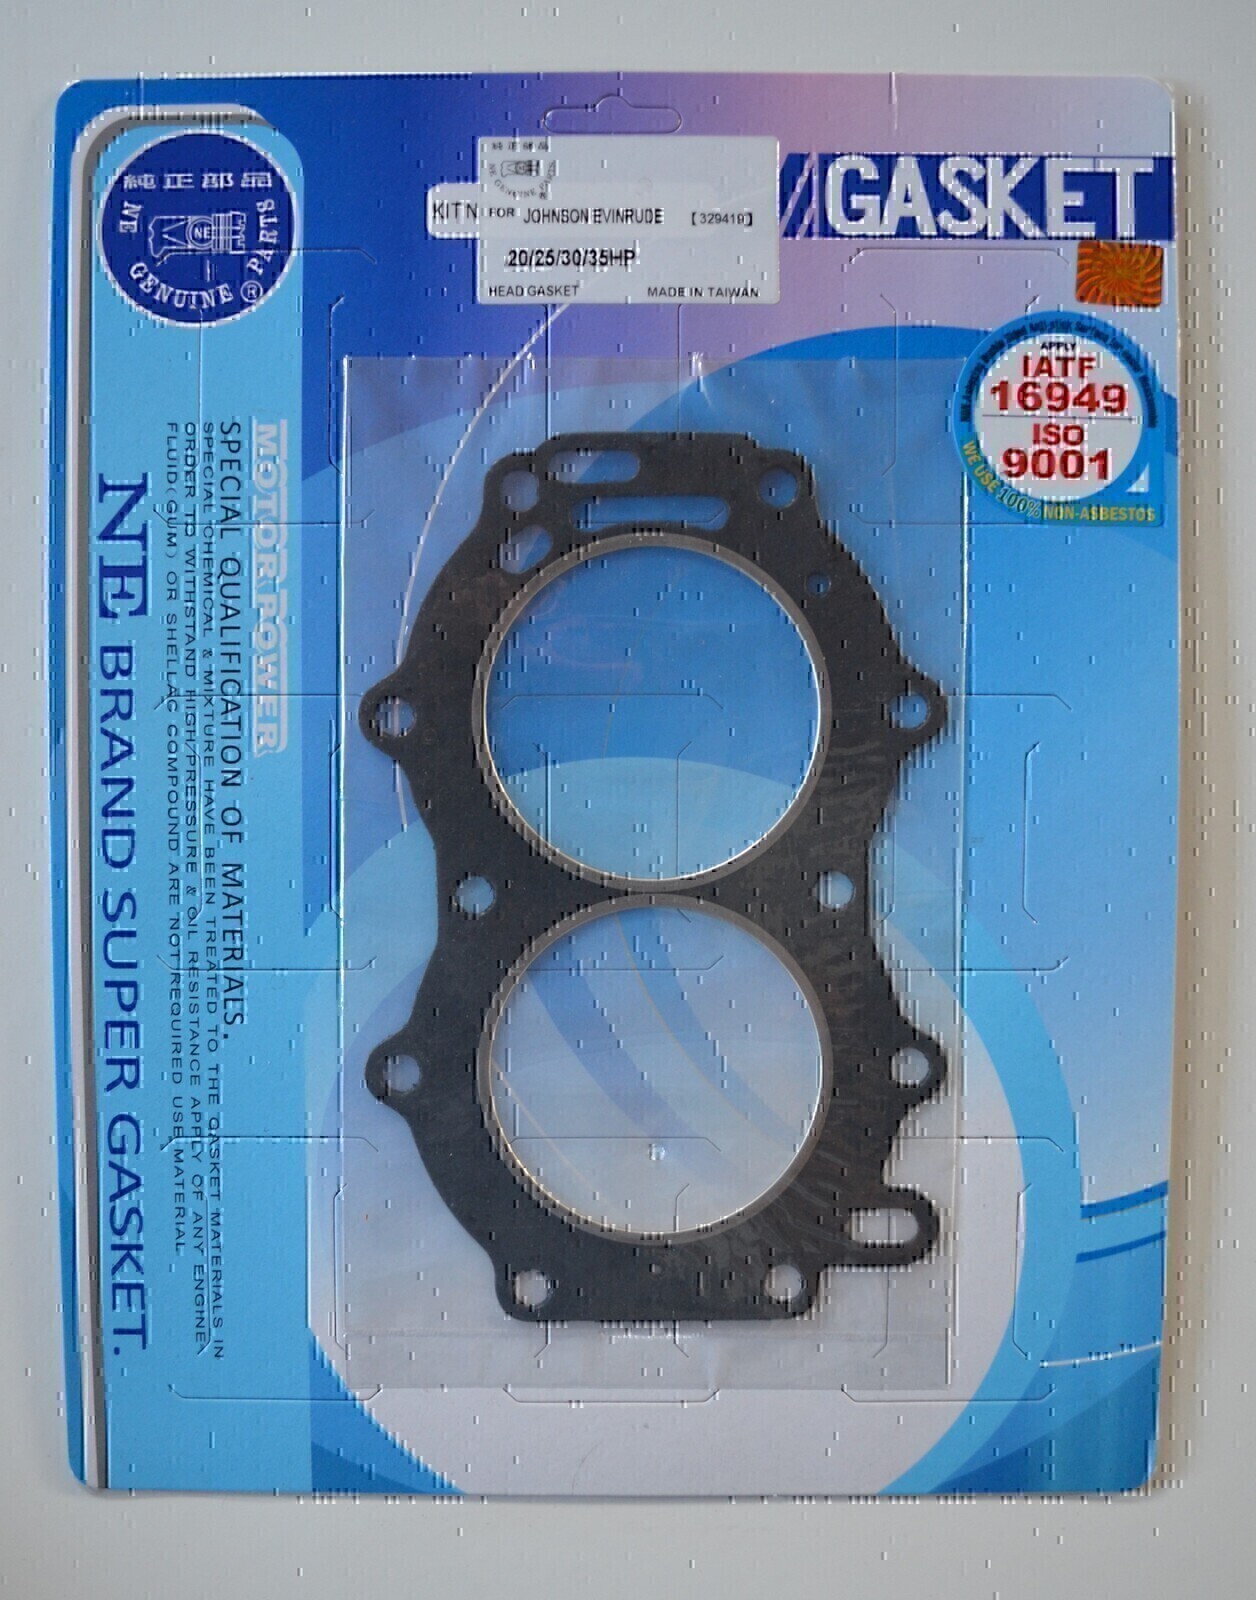 HEAD GASKET FOR EVINRUDE JOHNSON 20HP 25HP 30HP 35HP OUTBOARD MOTOR